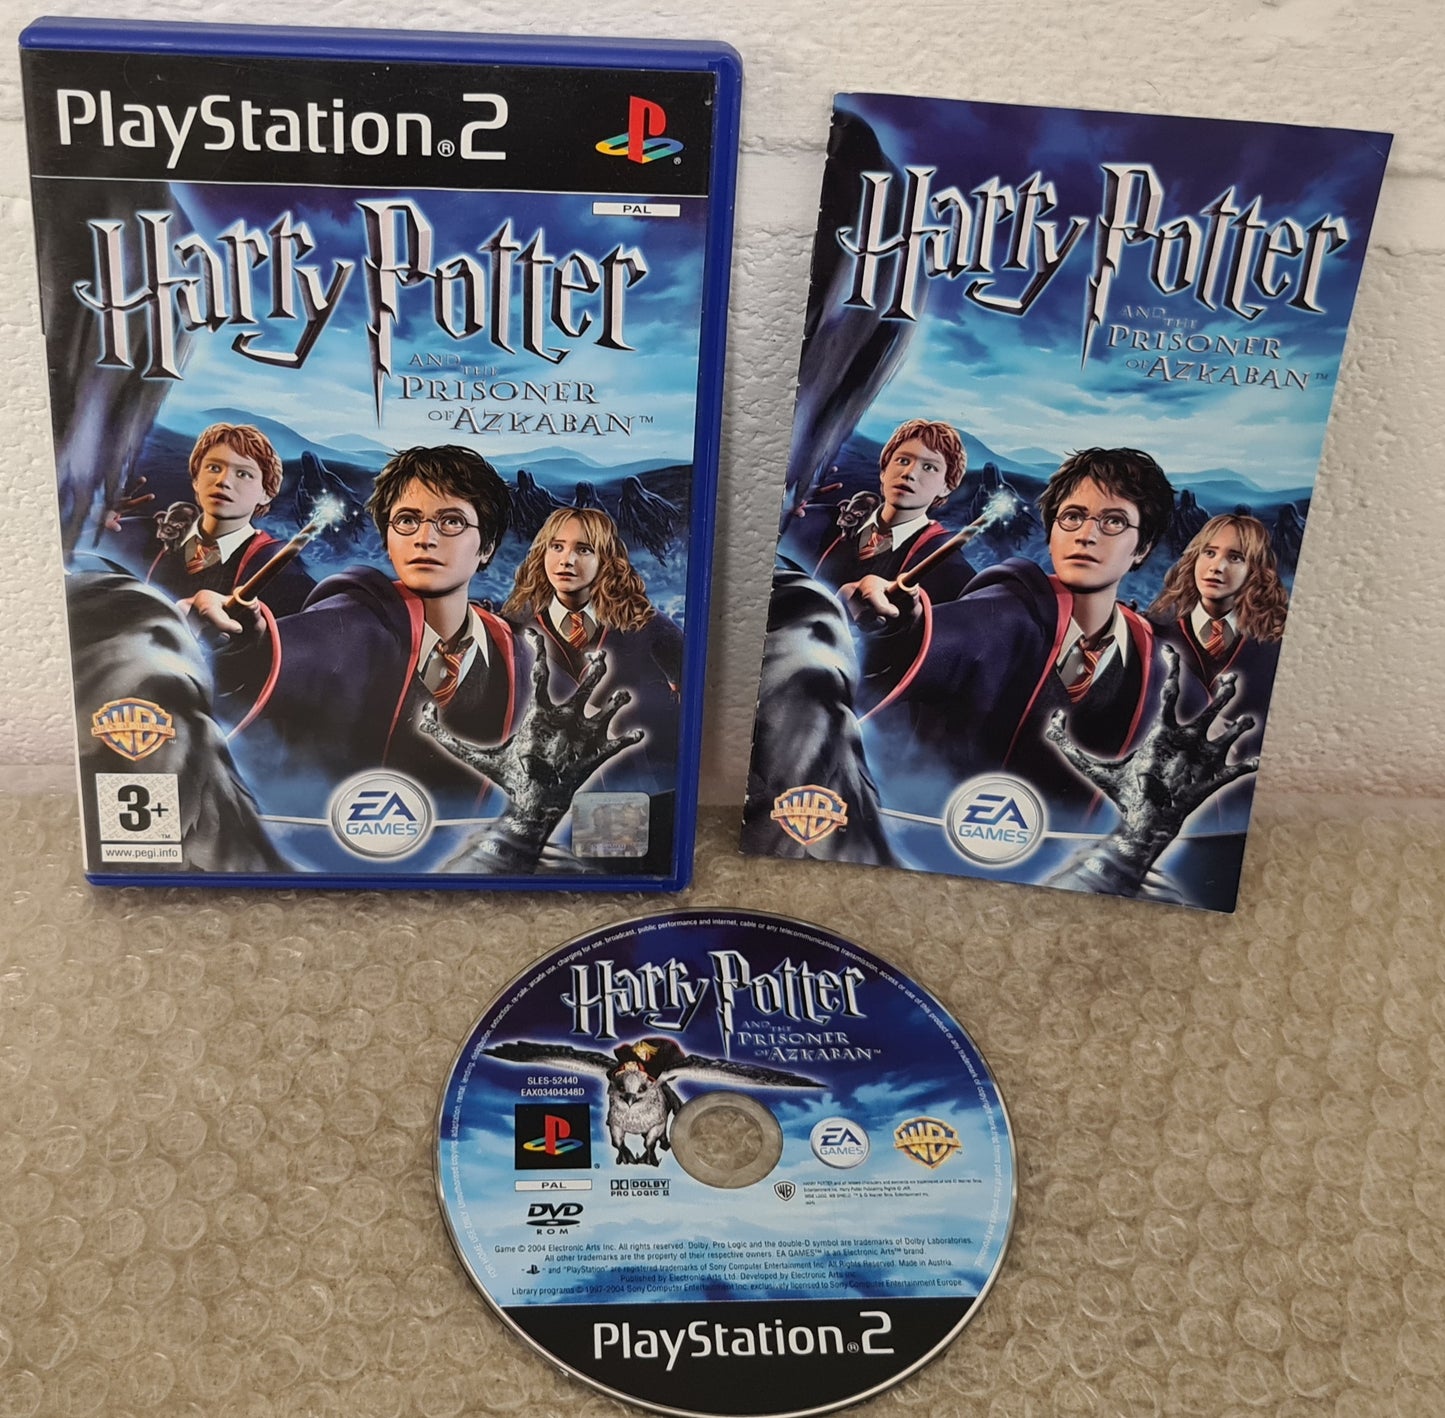 Harry Potter and the Prisoner of Azkaban Sony Playstation 2 (PS2) Game VGC